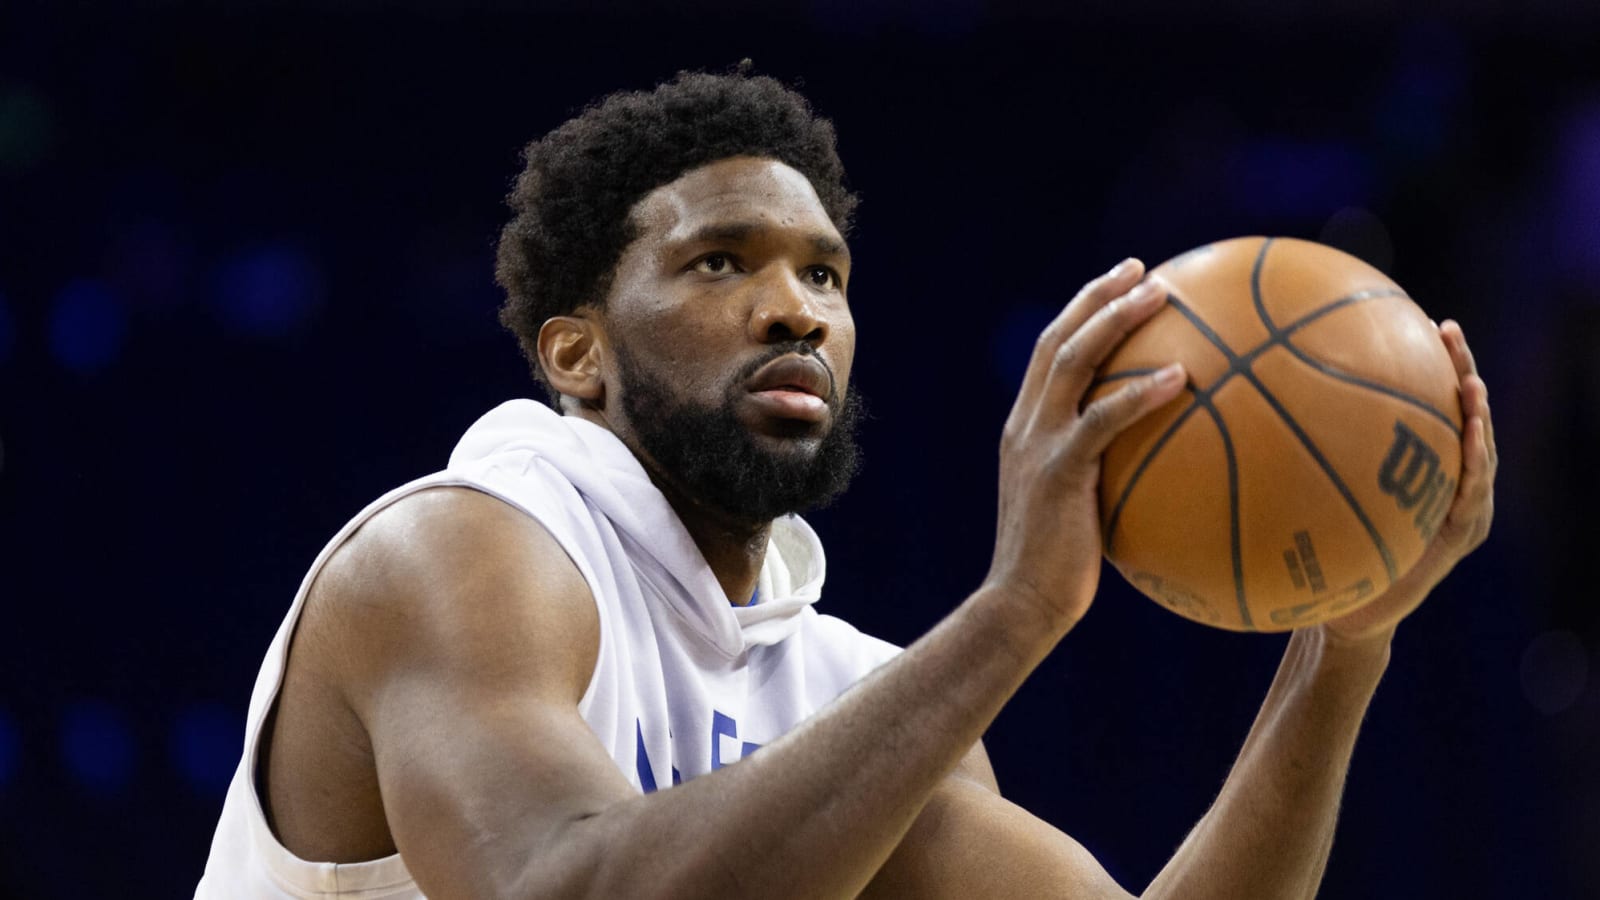 Watch: Trying to do James Harden’s stepback, Joel Embiid fails miserably